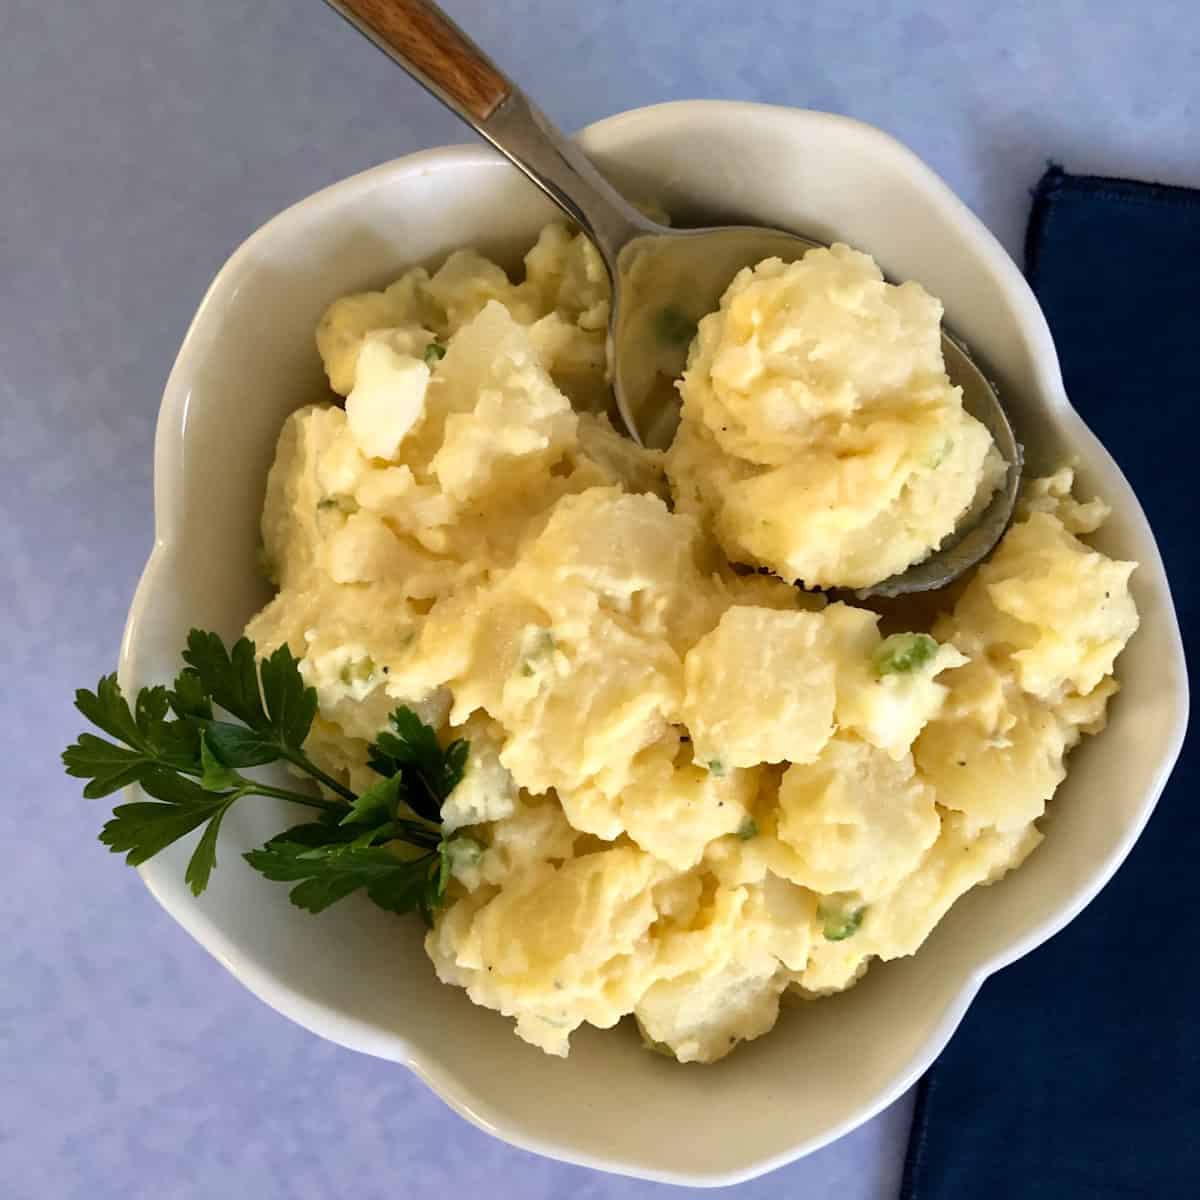 Potato salad in a white bowl with a spoon and blue background.